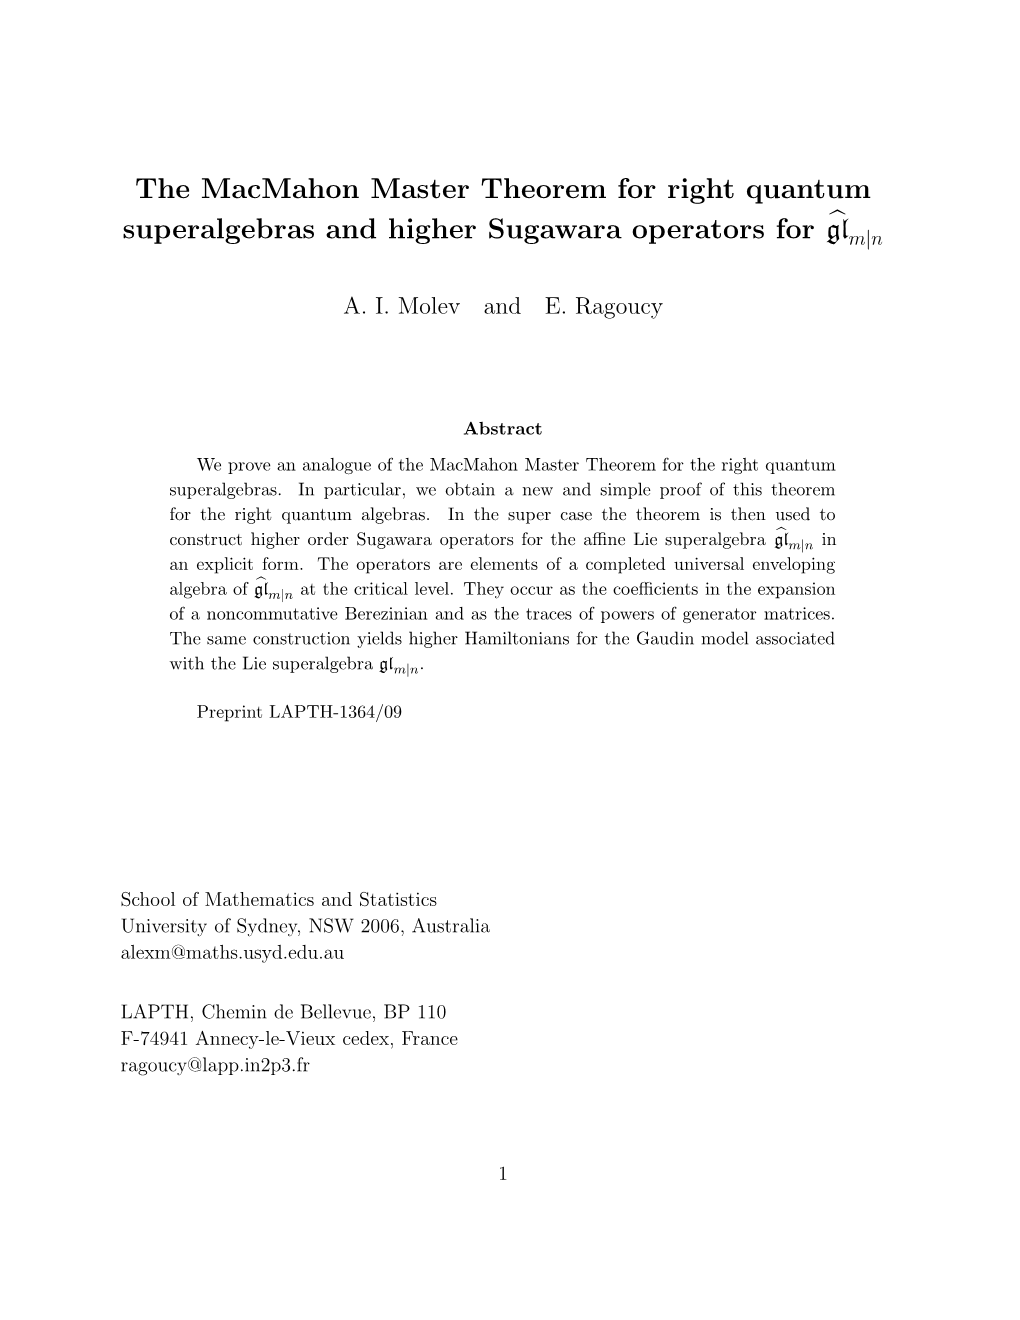 The Macmahon Master Theorem for Right Quantum Superalgebras and Higher Sugawara Operators for ̂Glm|N